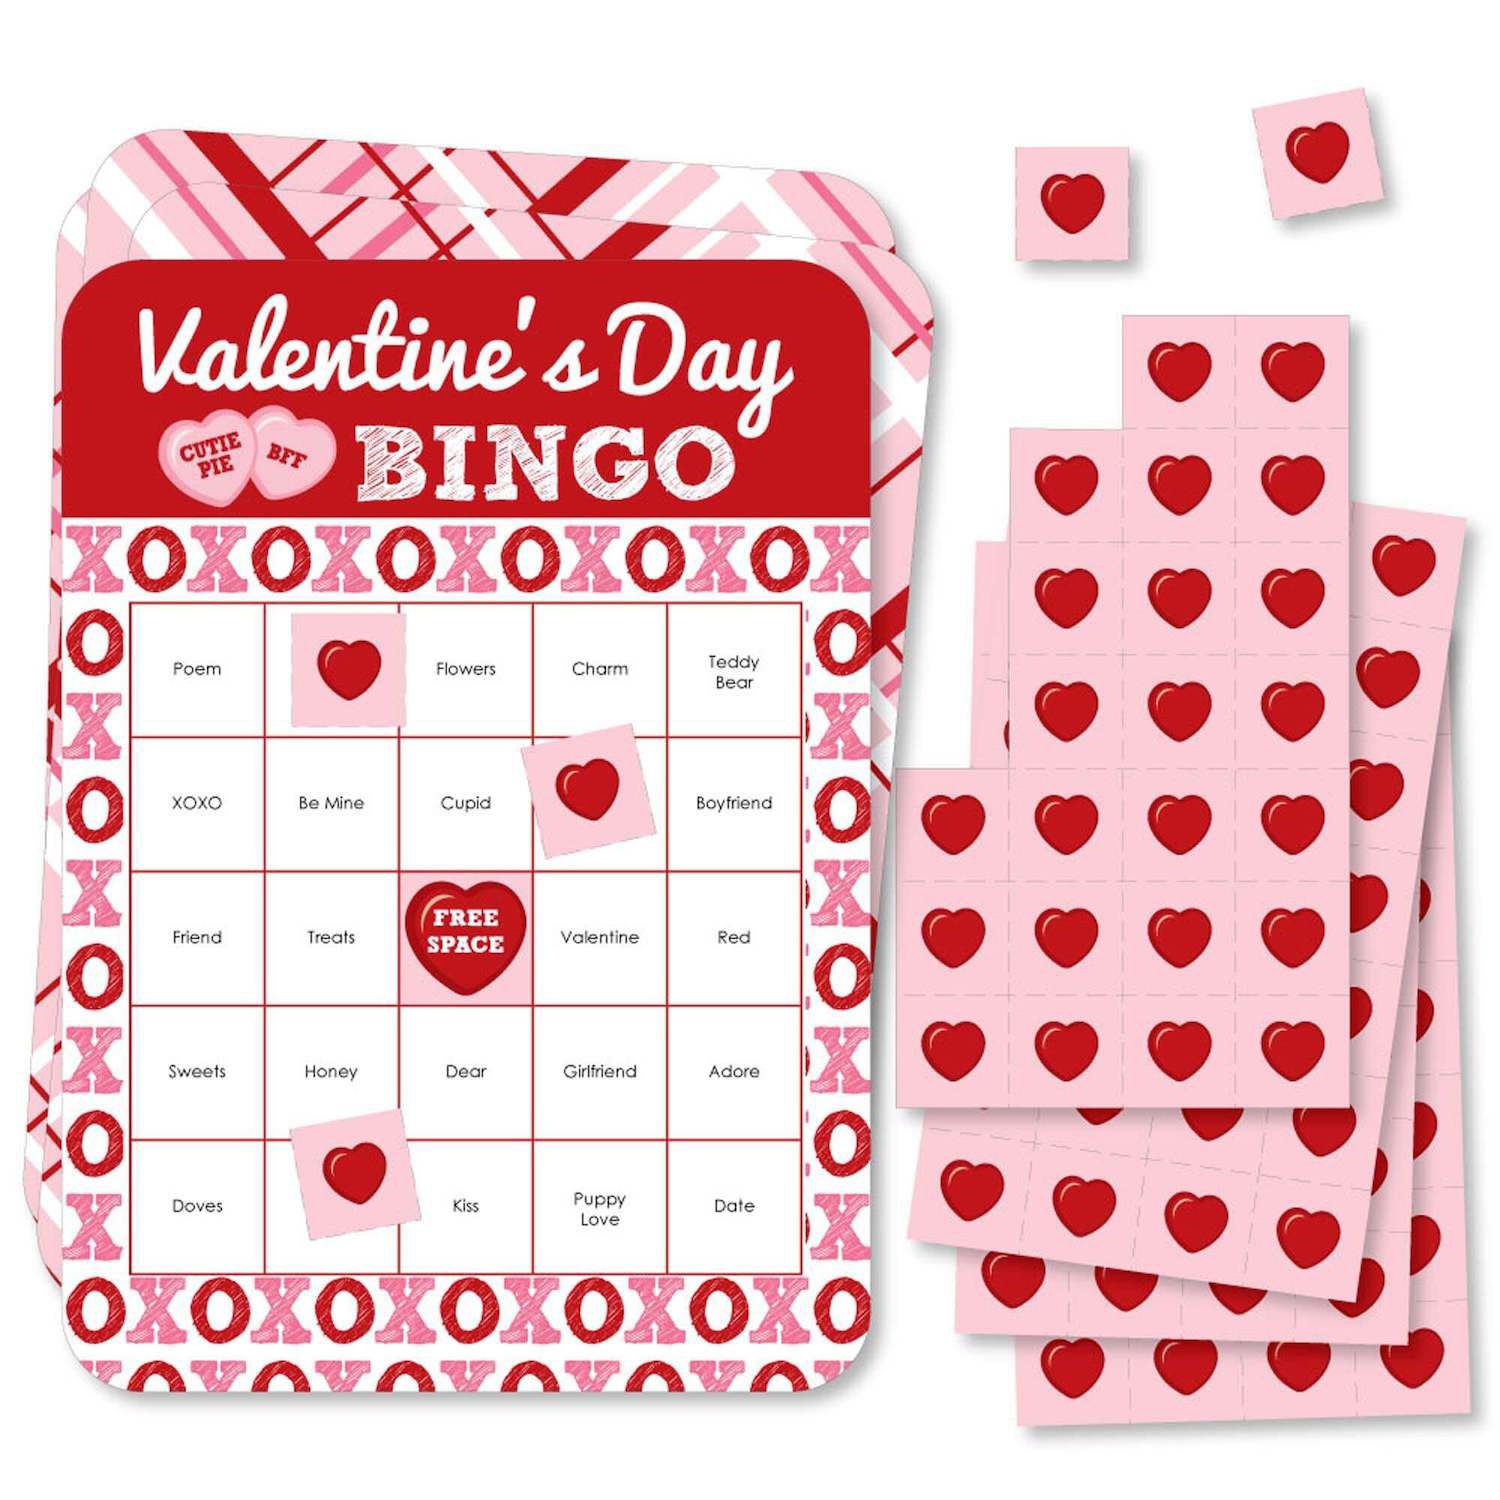 Hallmark Valentines Day Cards Assortment for Kids, Be Happy (8 Valentine's  Day Cards with Envelopes)